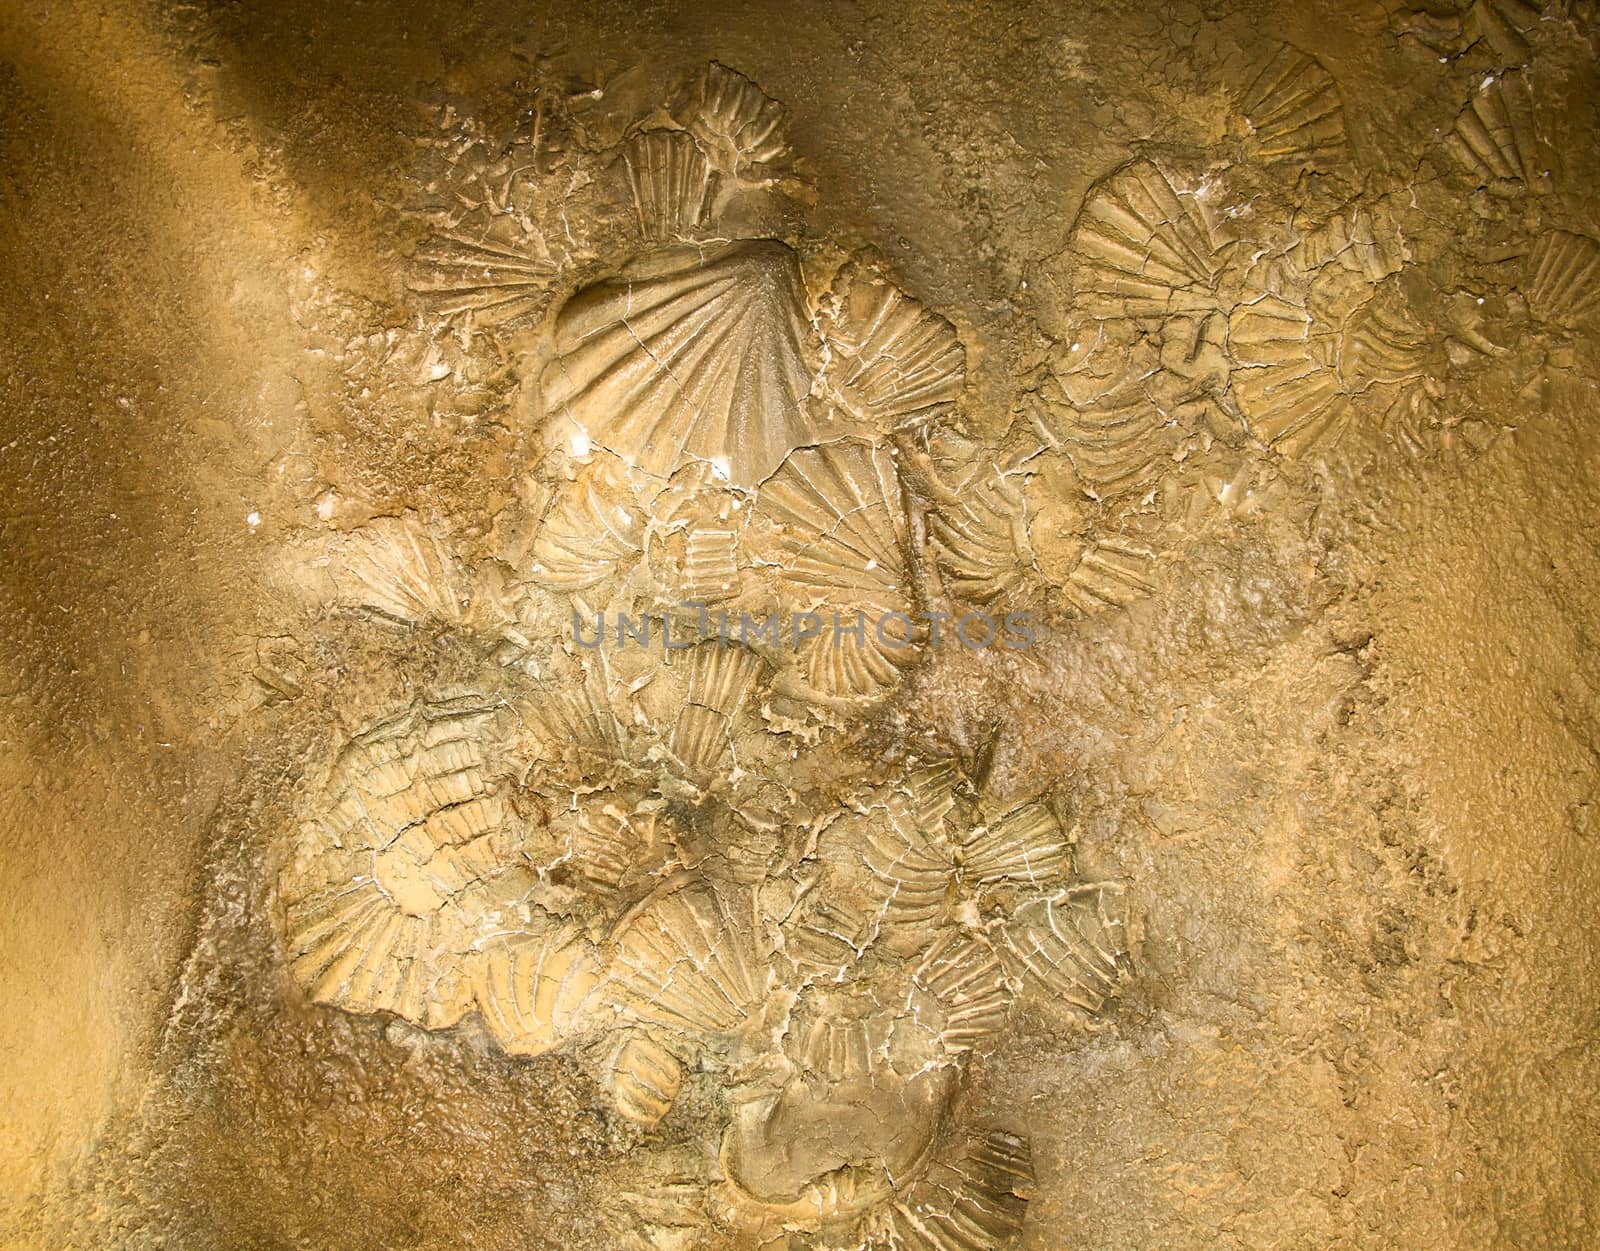 Shell sediment abstract by shutswis